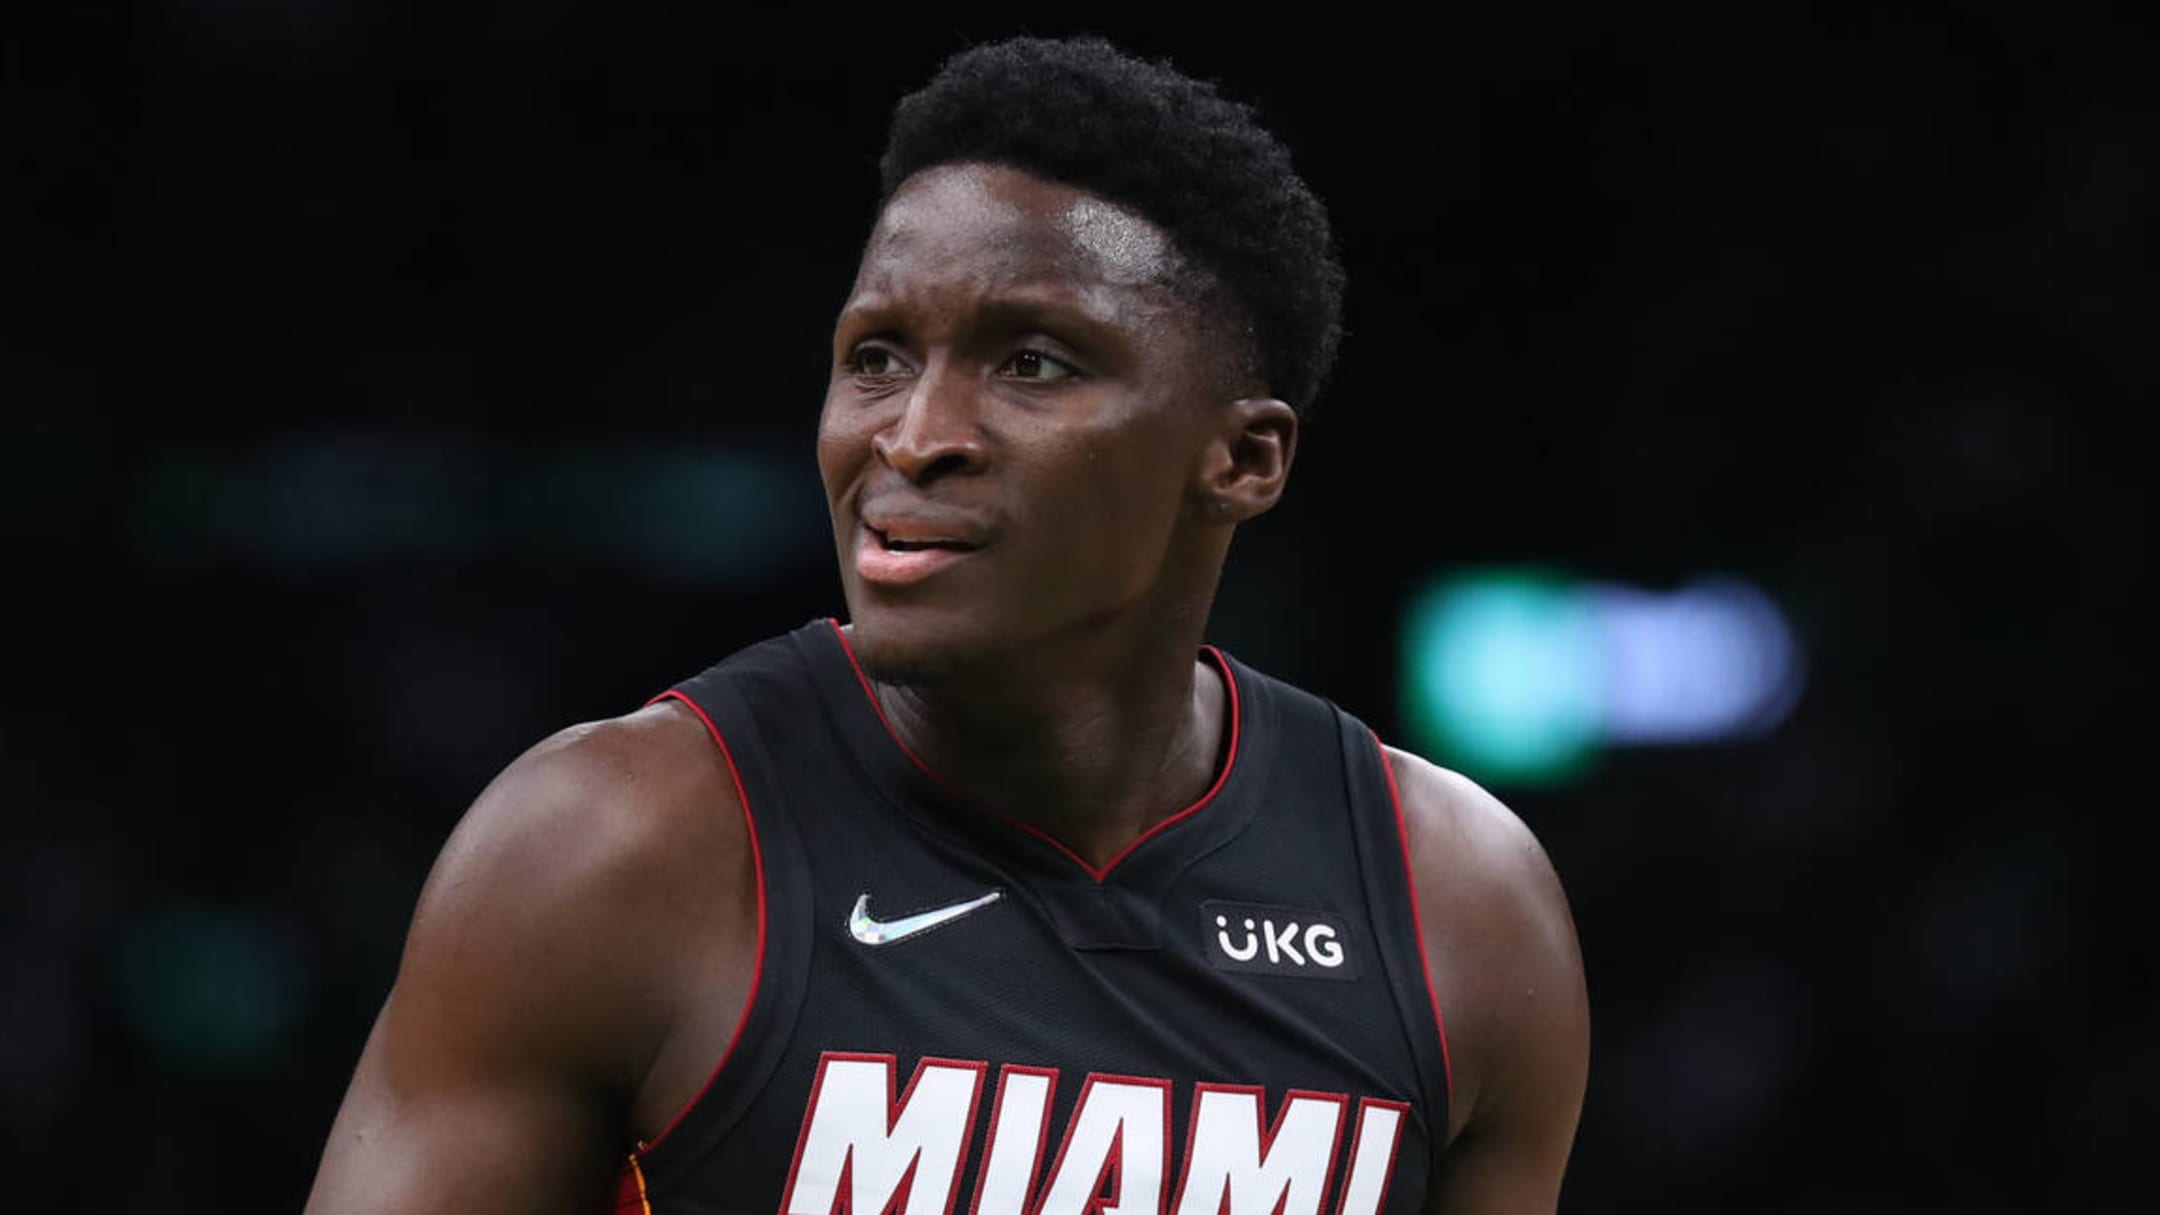 Victor Oladipo plays well in Summer League debut with the Magic